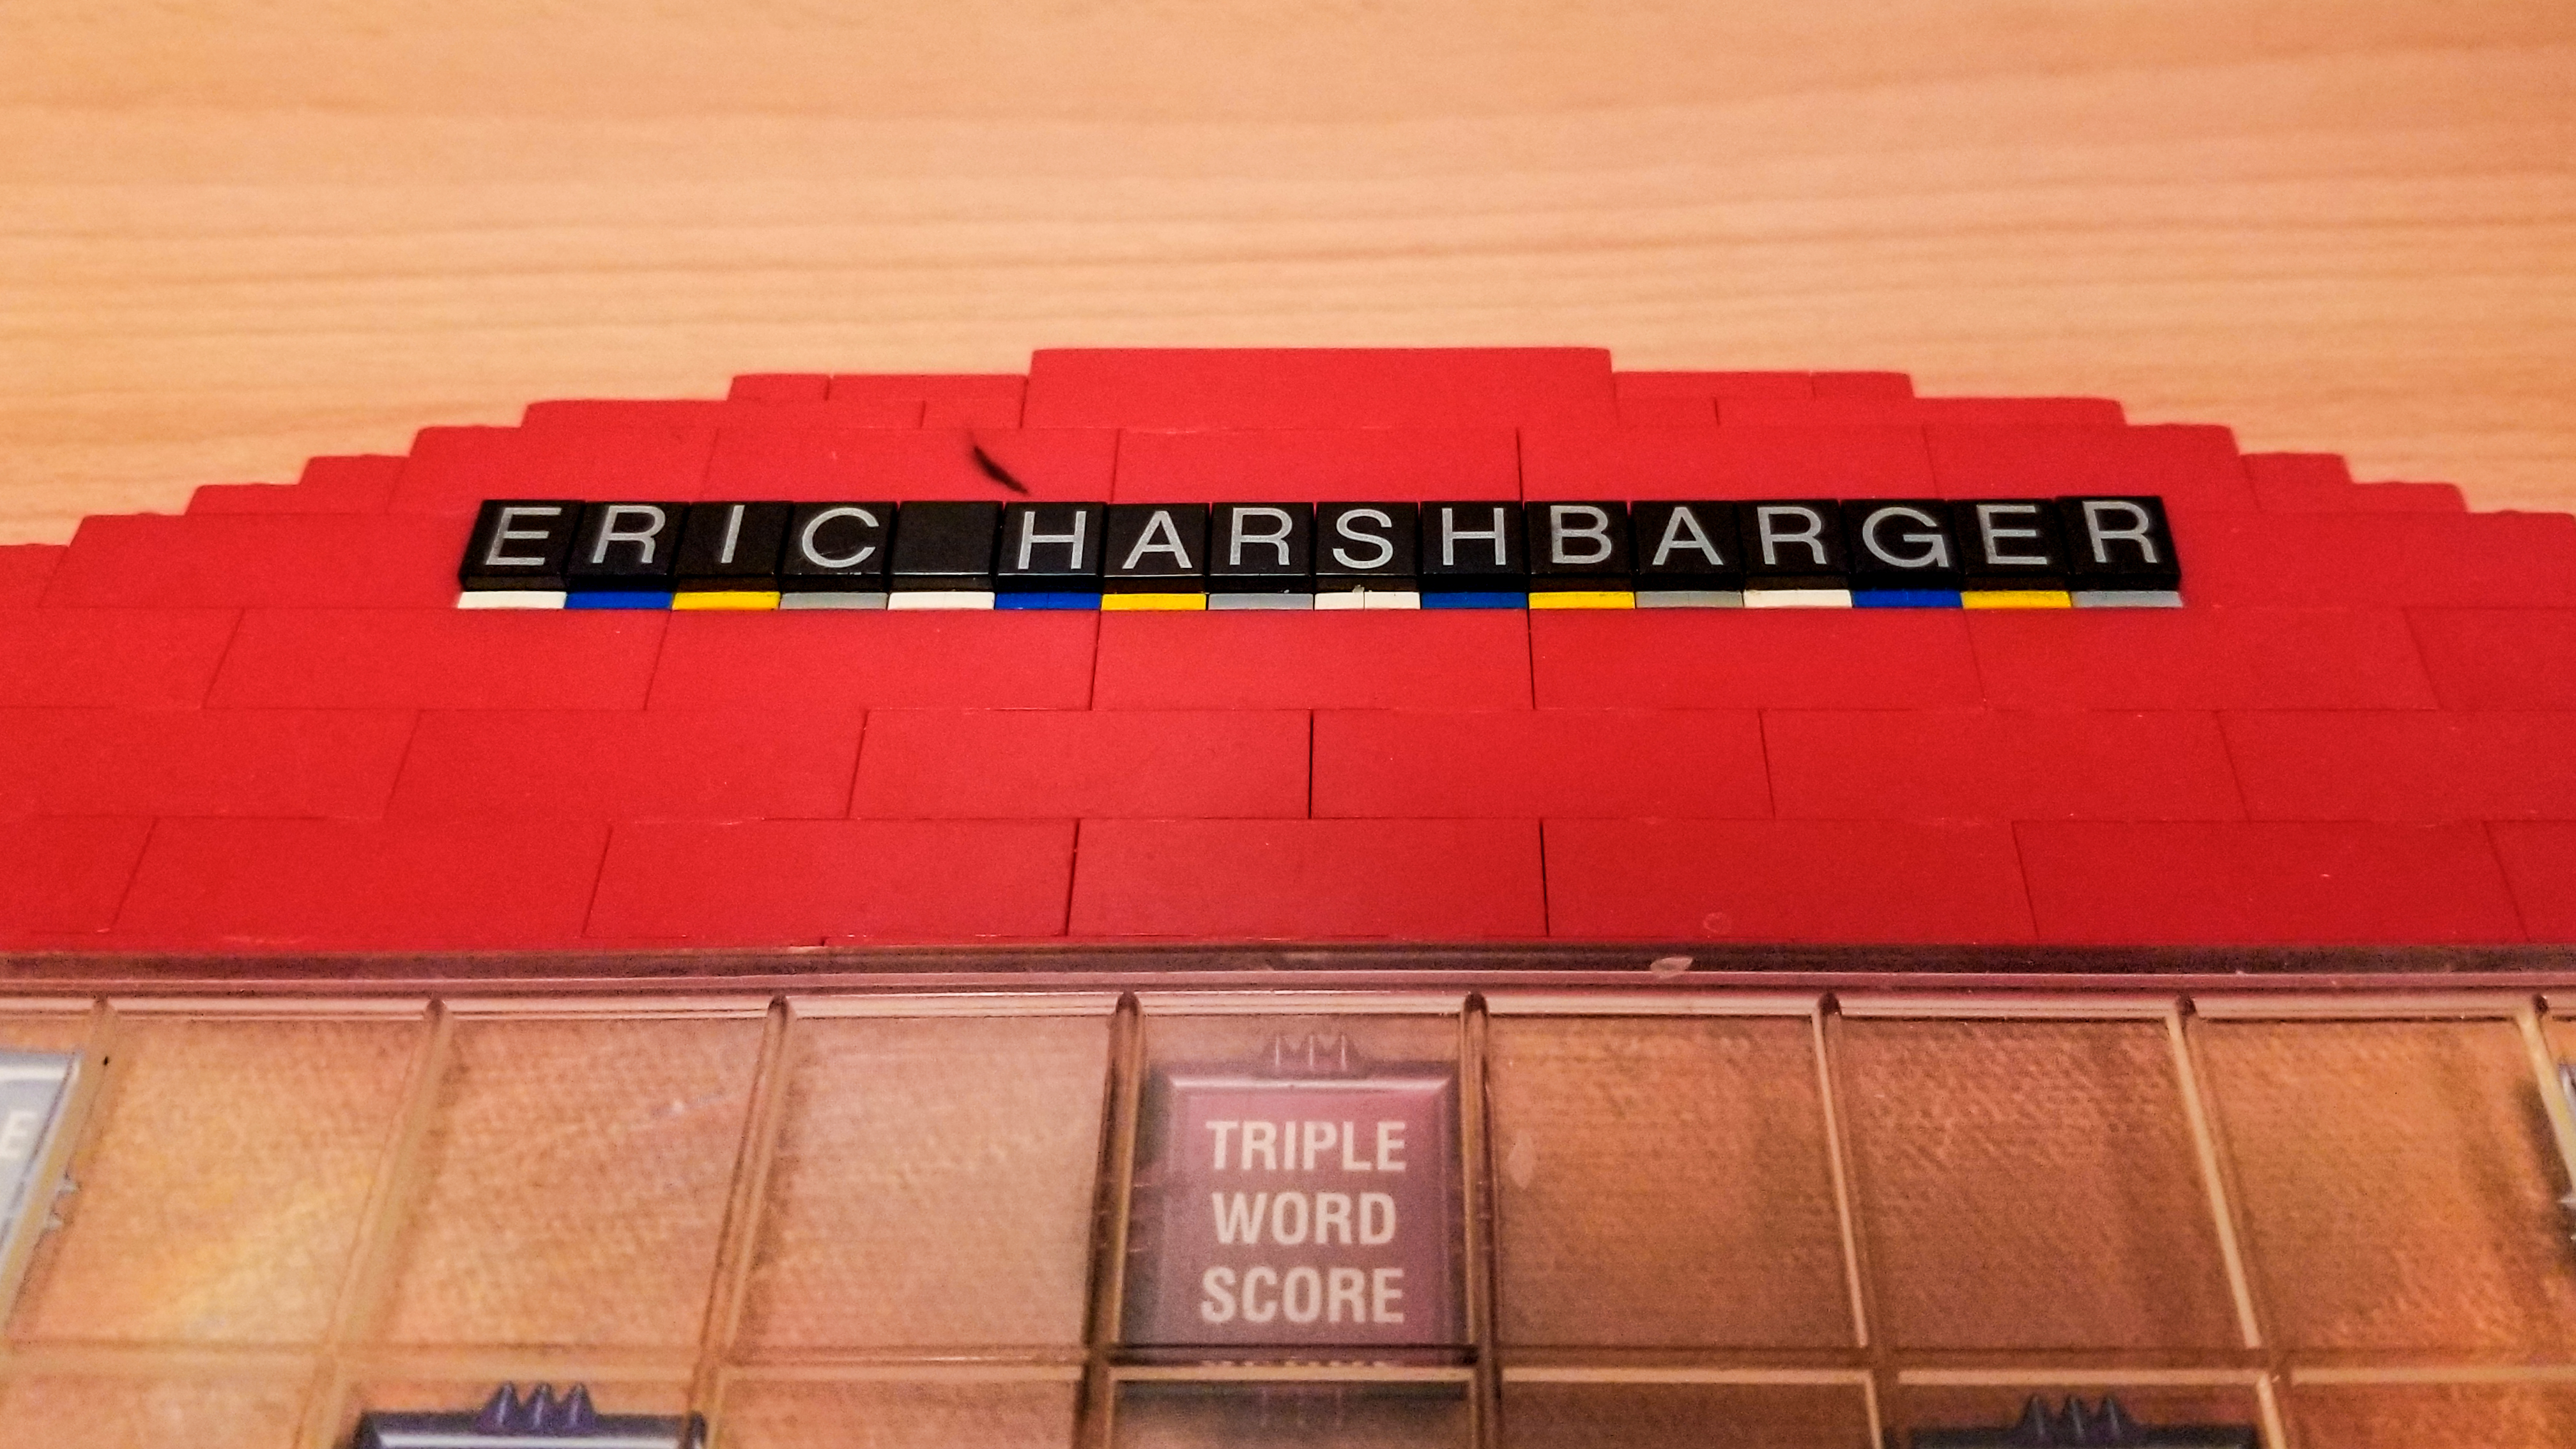 Professional Scrabble Board with Harshbarger's name.